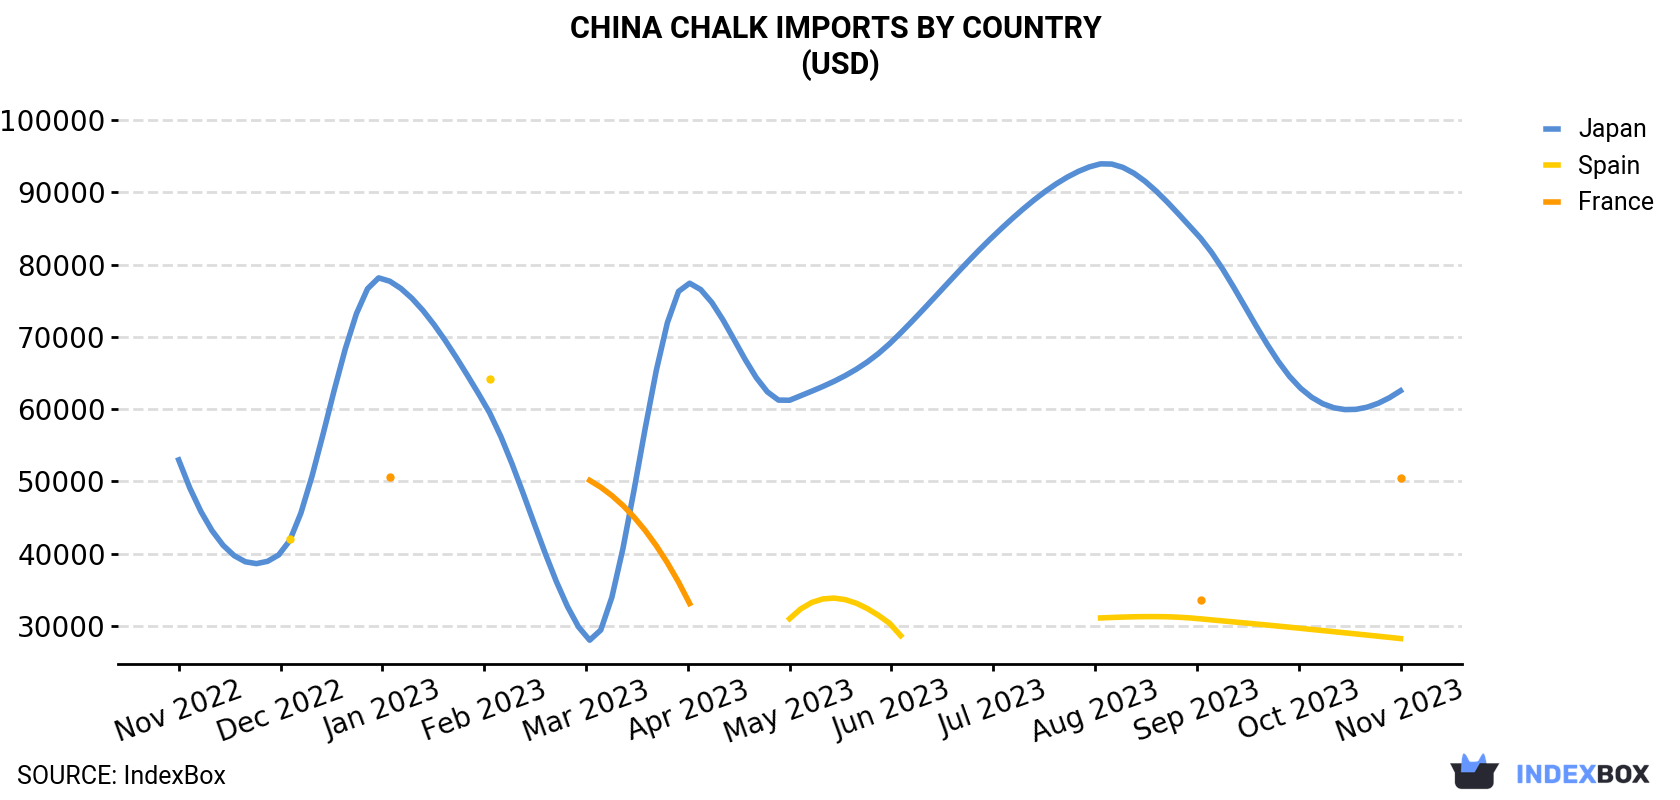 China Chalk Imports By Country (USD)